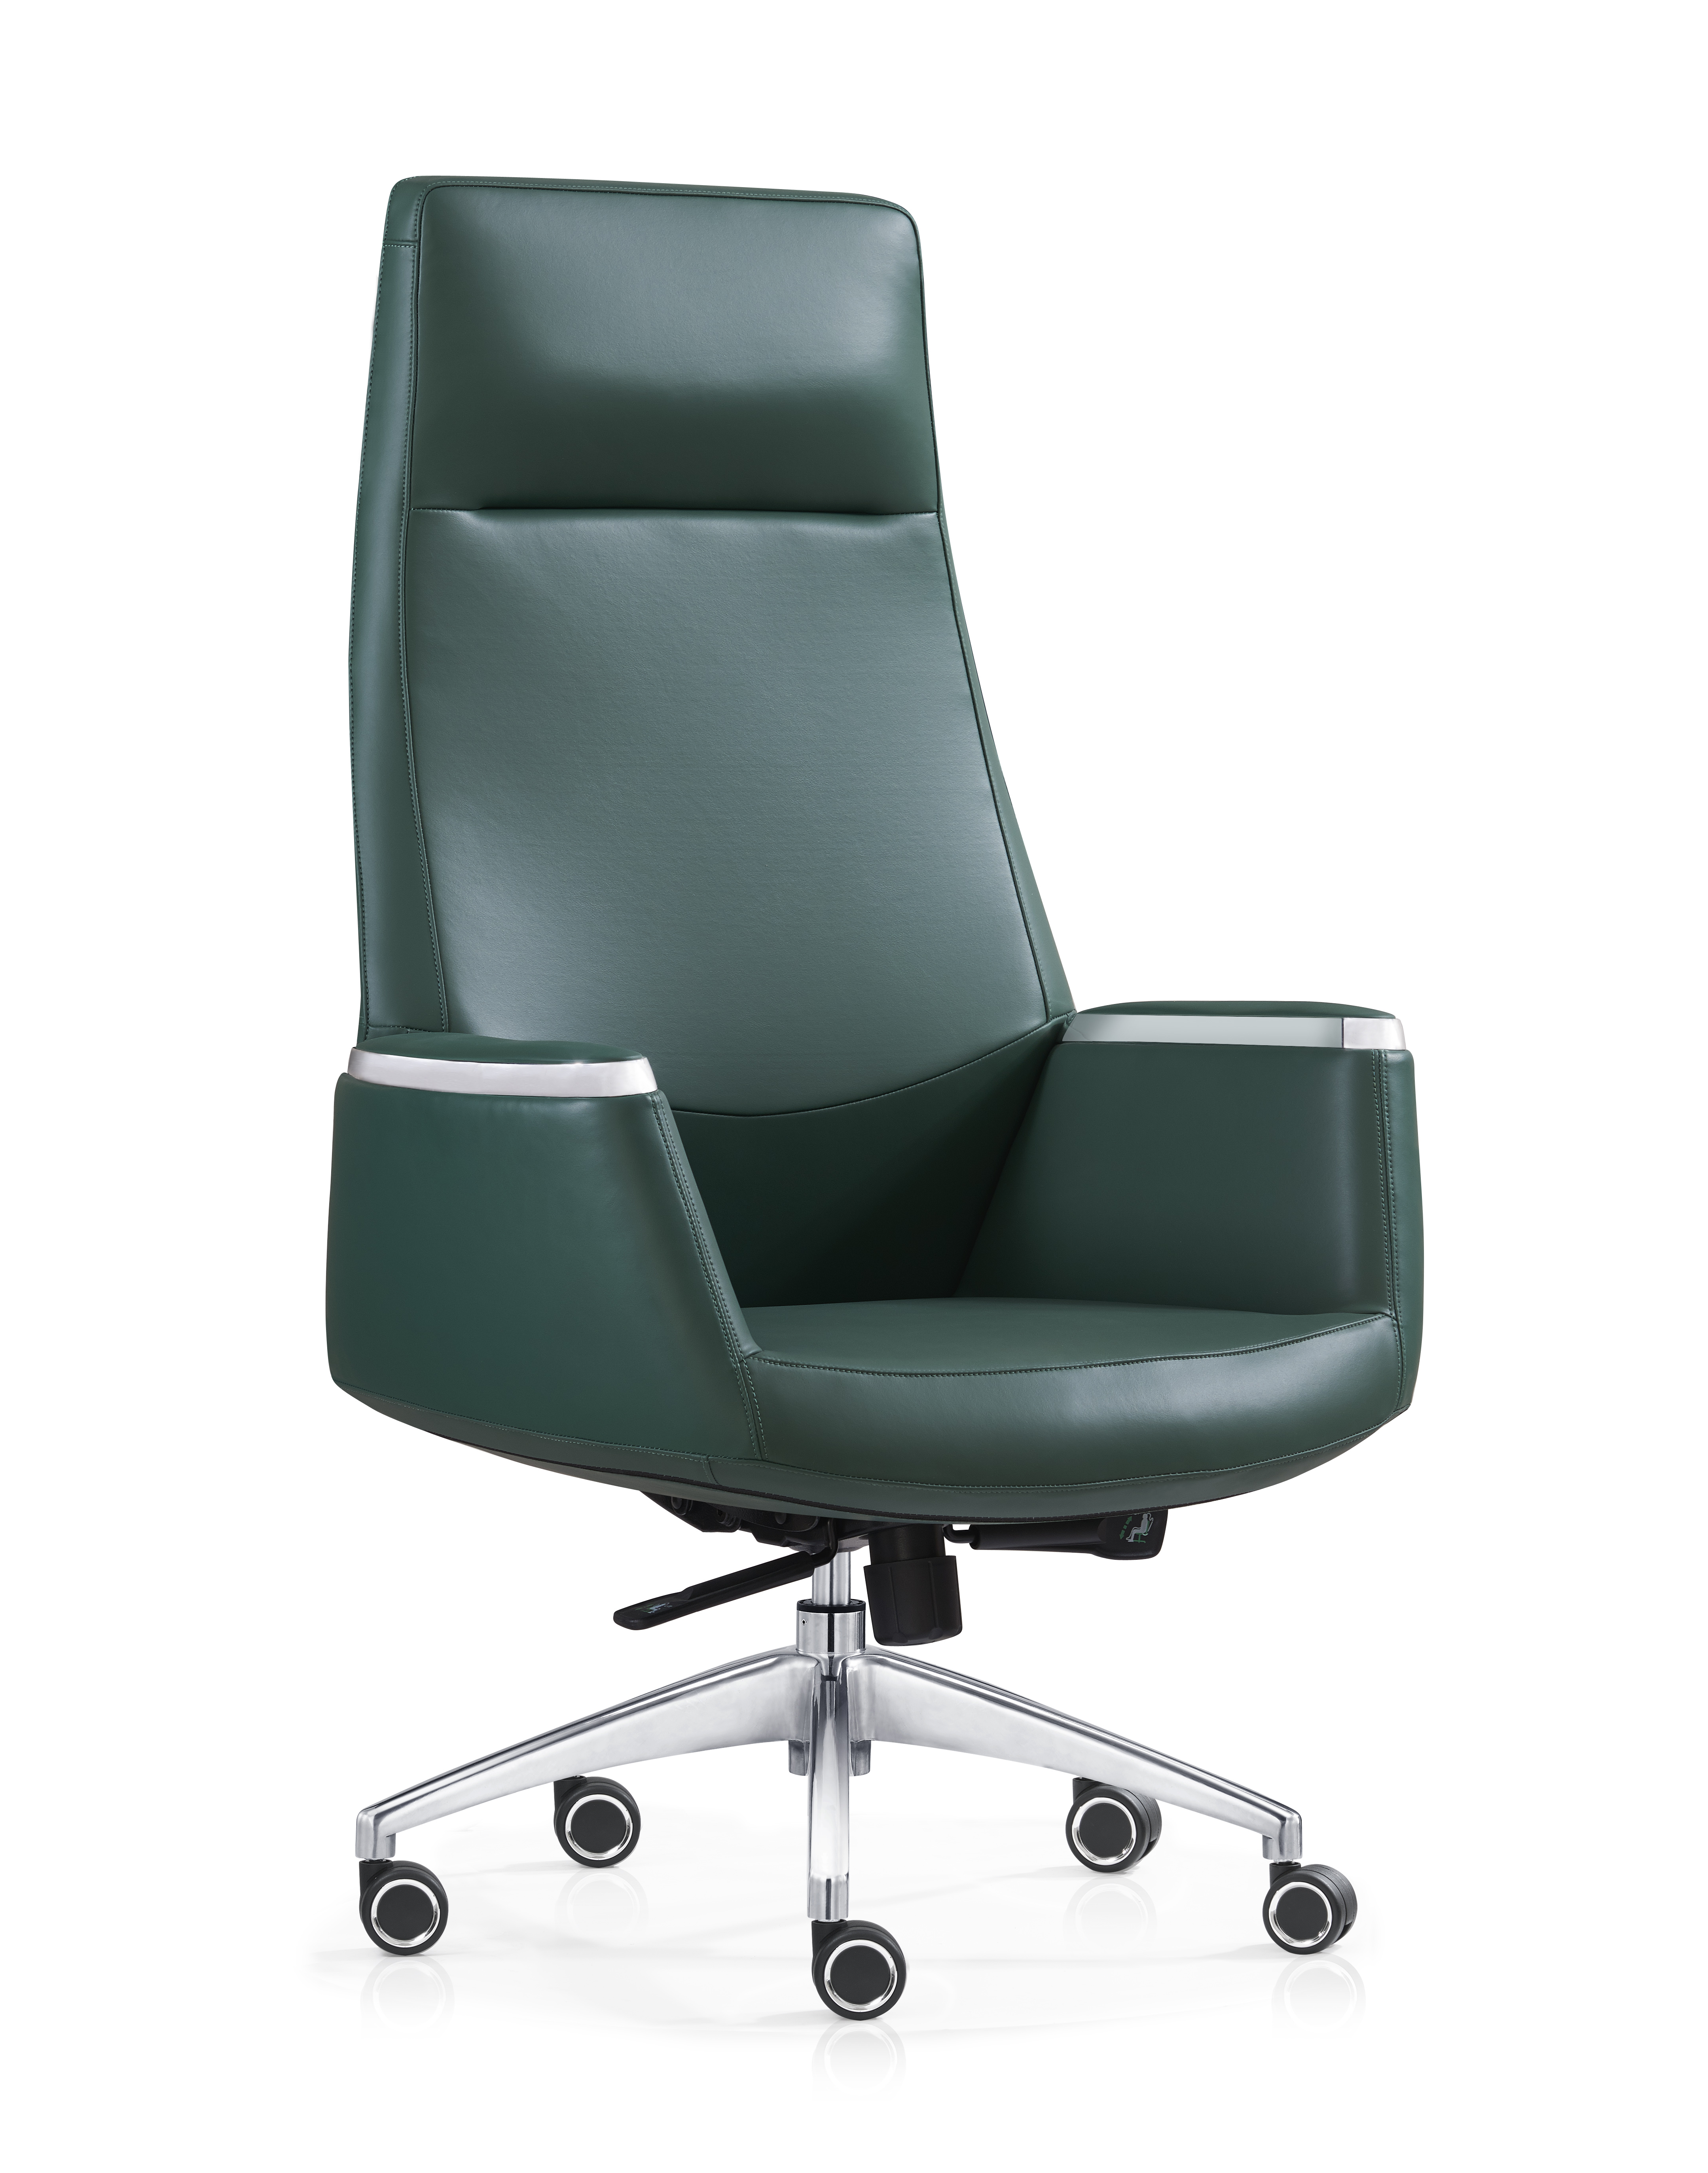 The Flexible Back Chair: A Perfect Blend of Comfort and Support